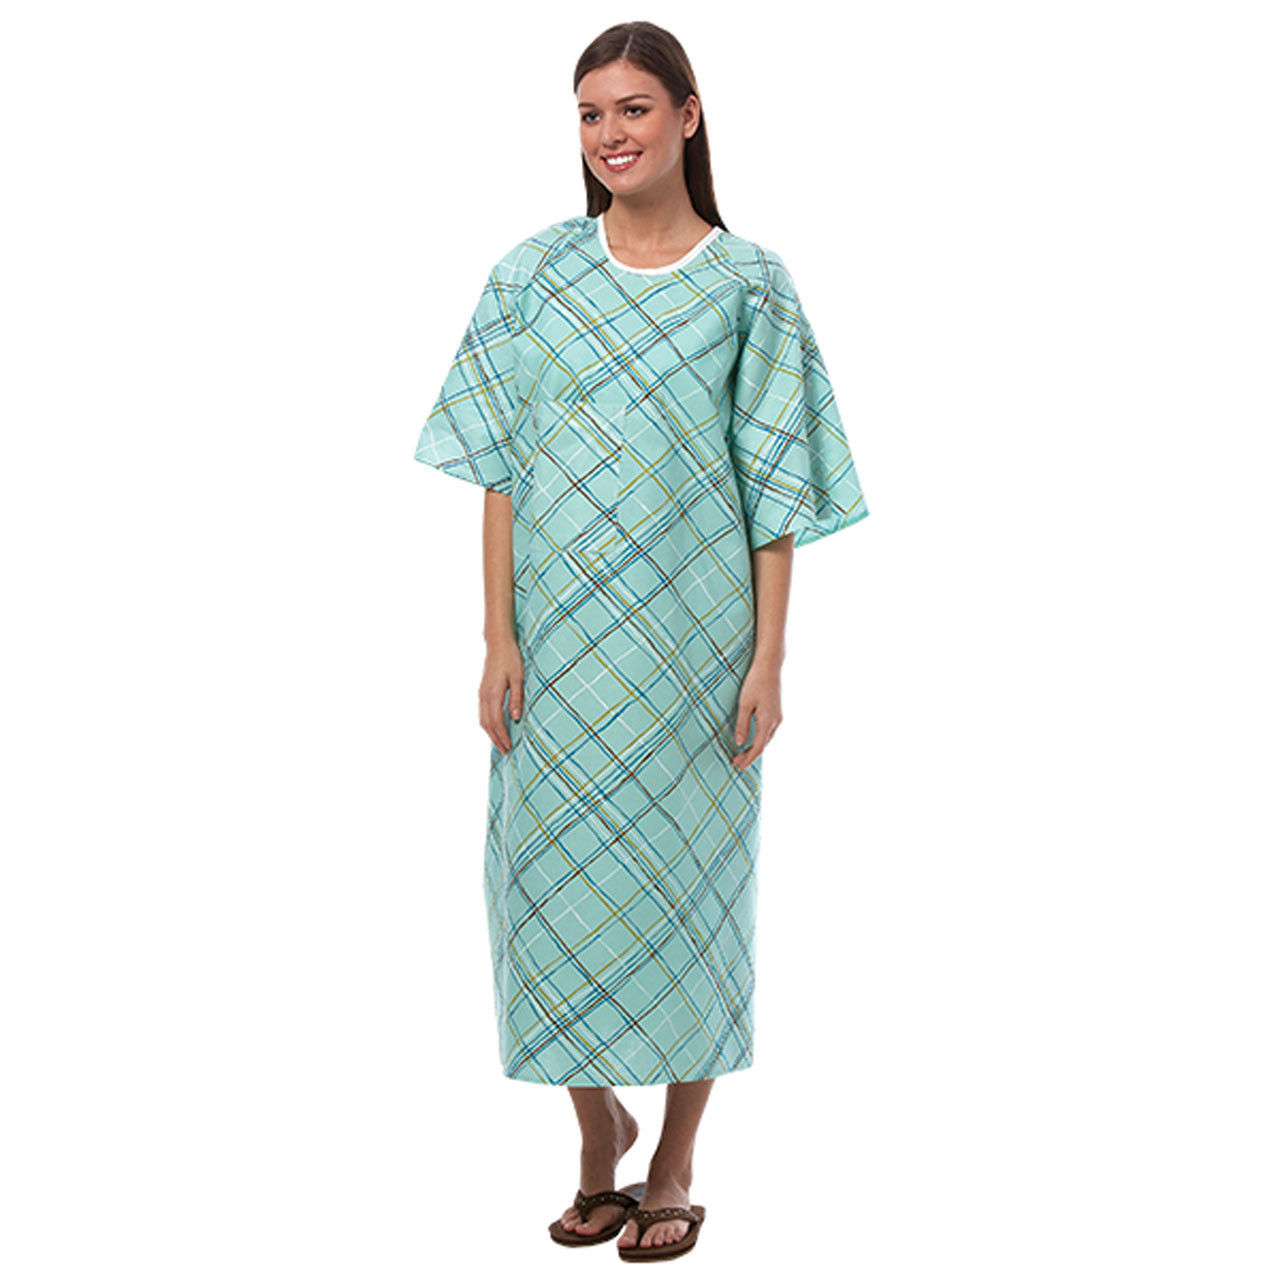 Do the comfortable patient gowns have any special features on the sleeves?